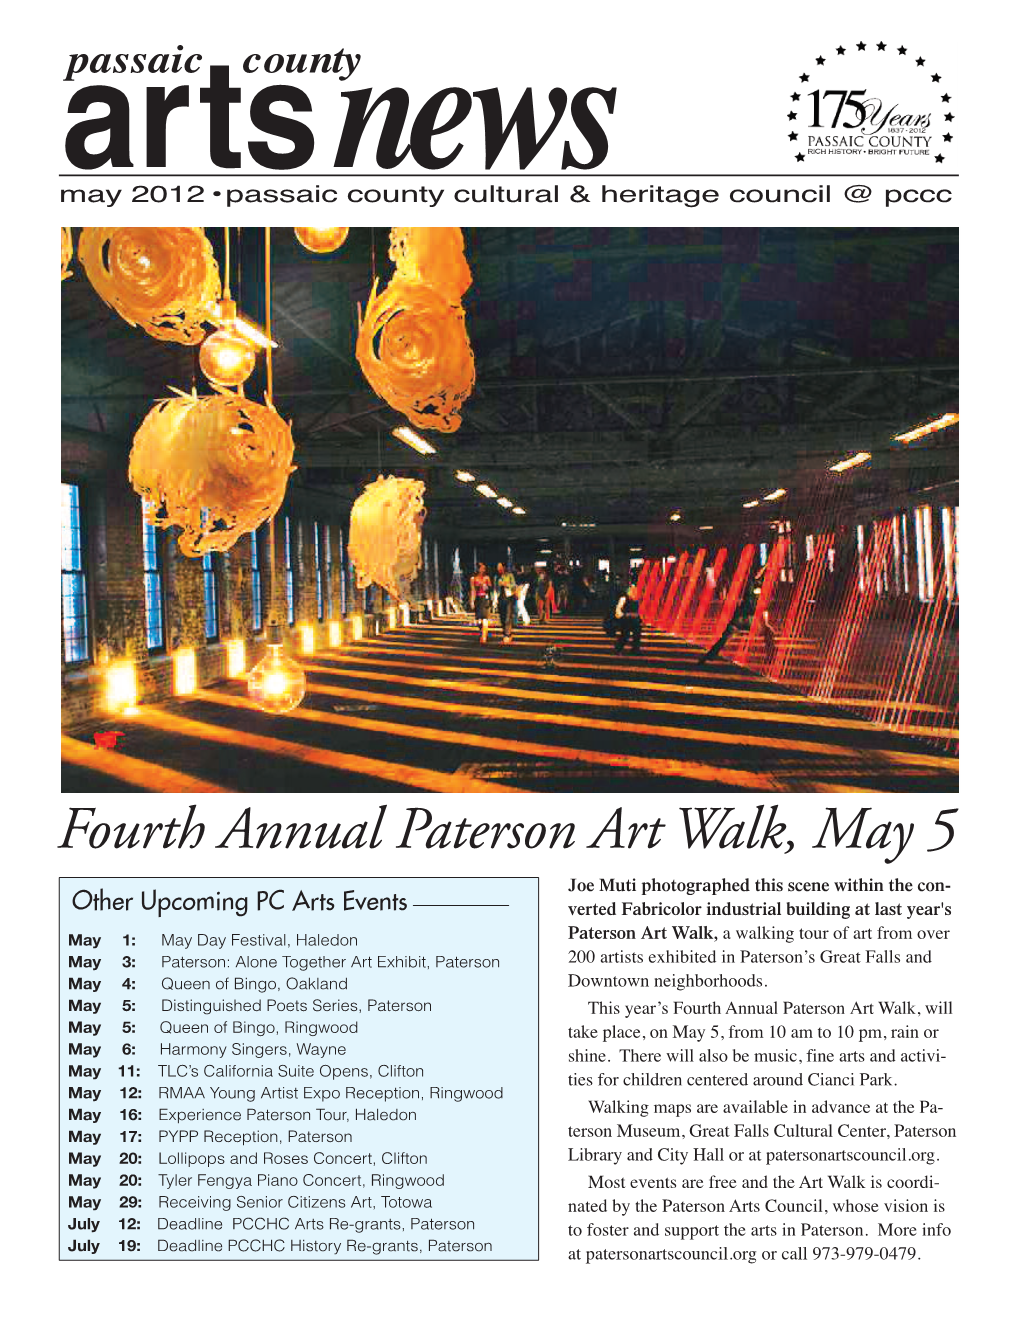 Fourth Annual Paterson Art Walk, May 5